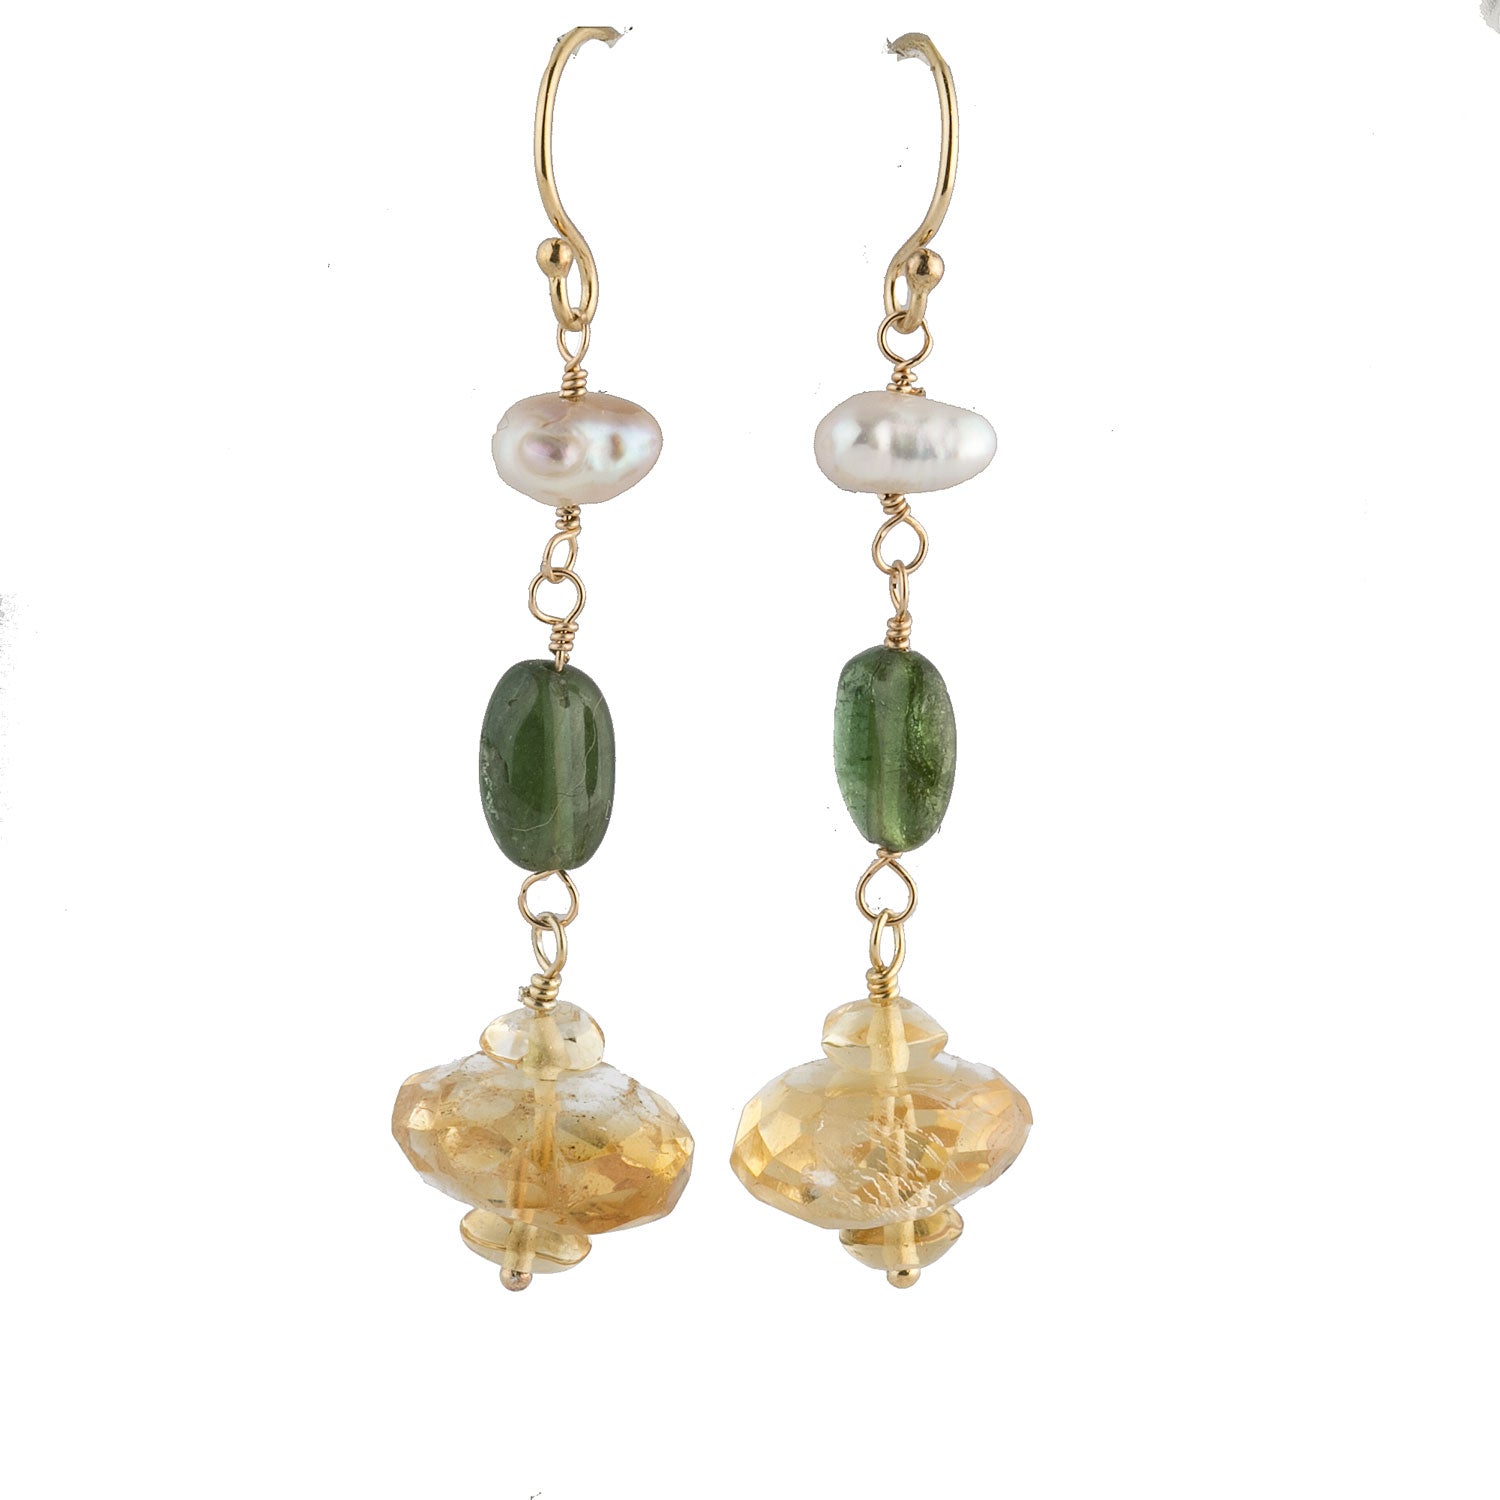 Earrings of vintage natural citrine tourmaline and Biwa pearls ...